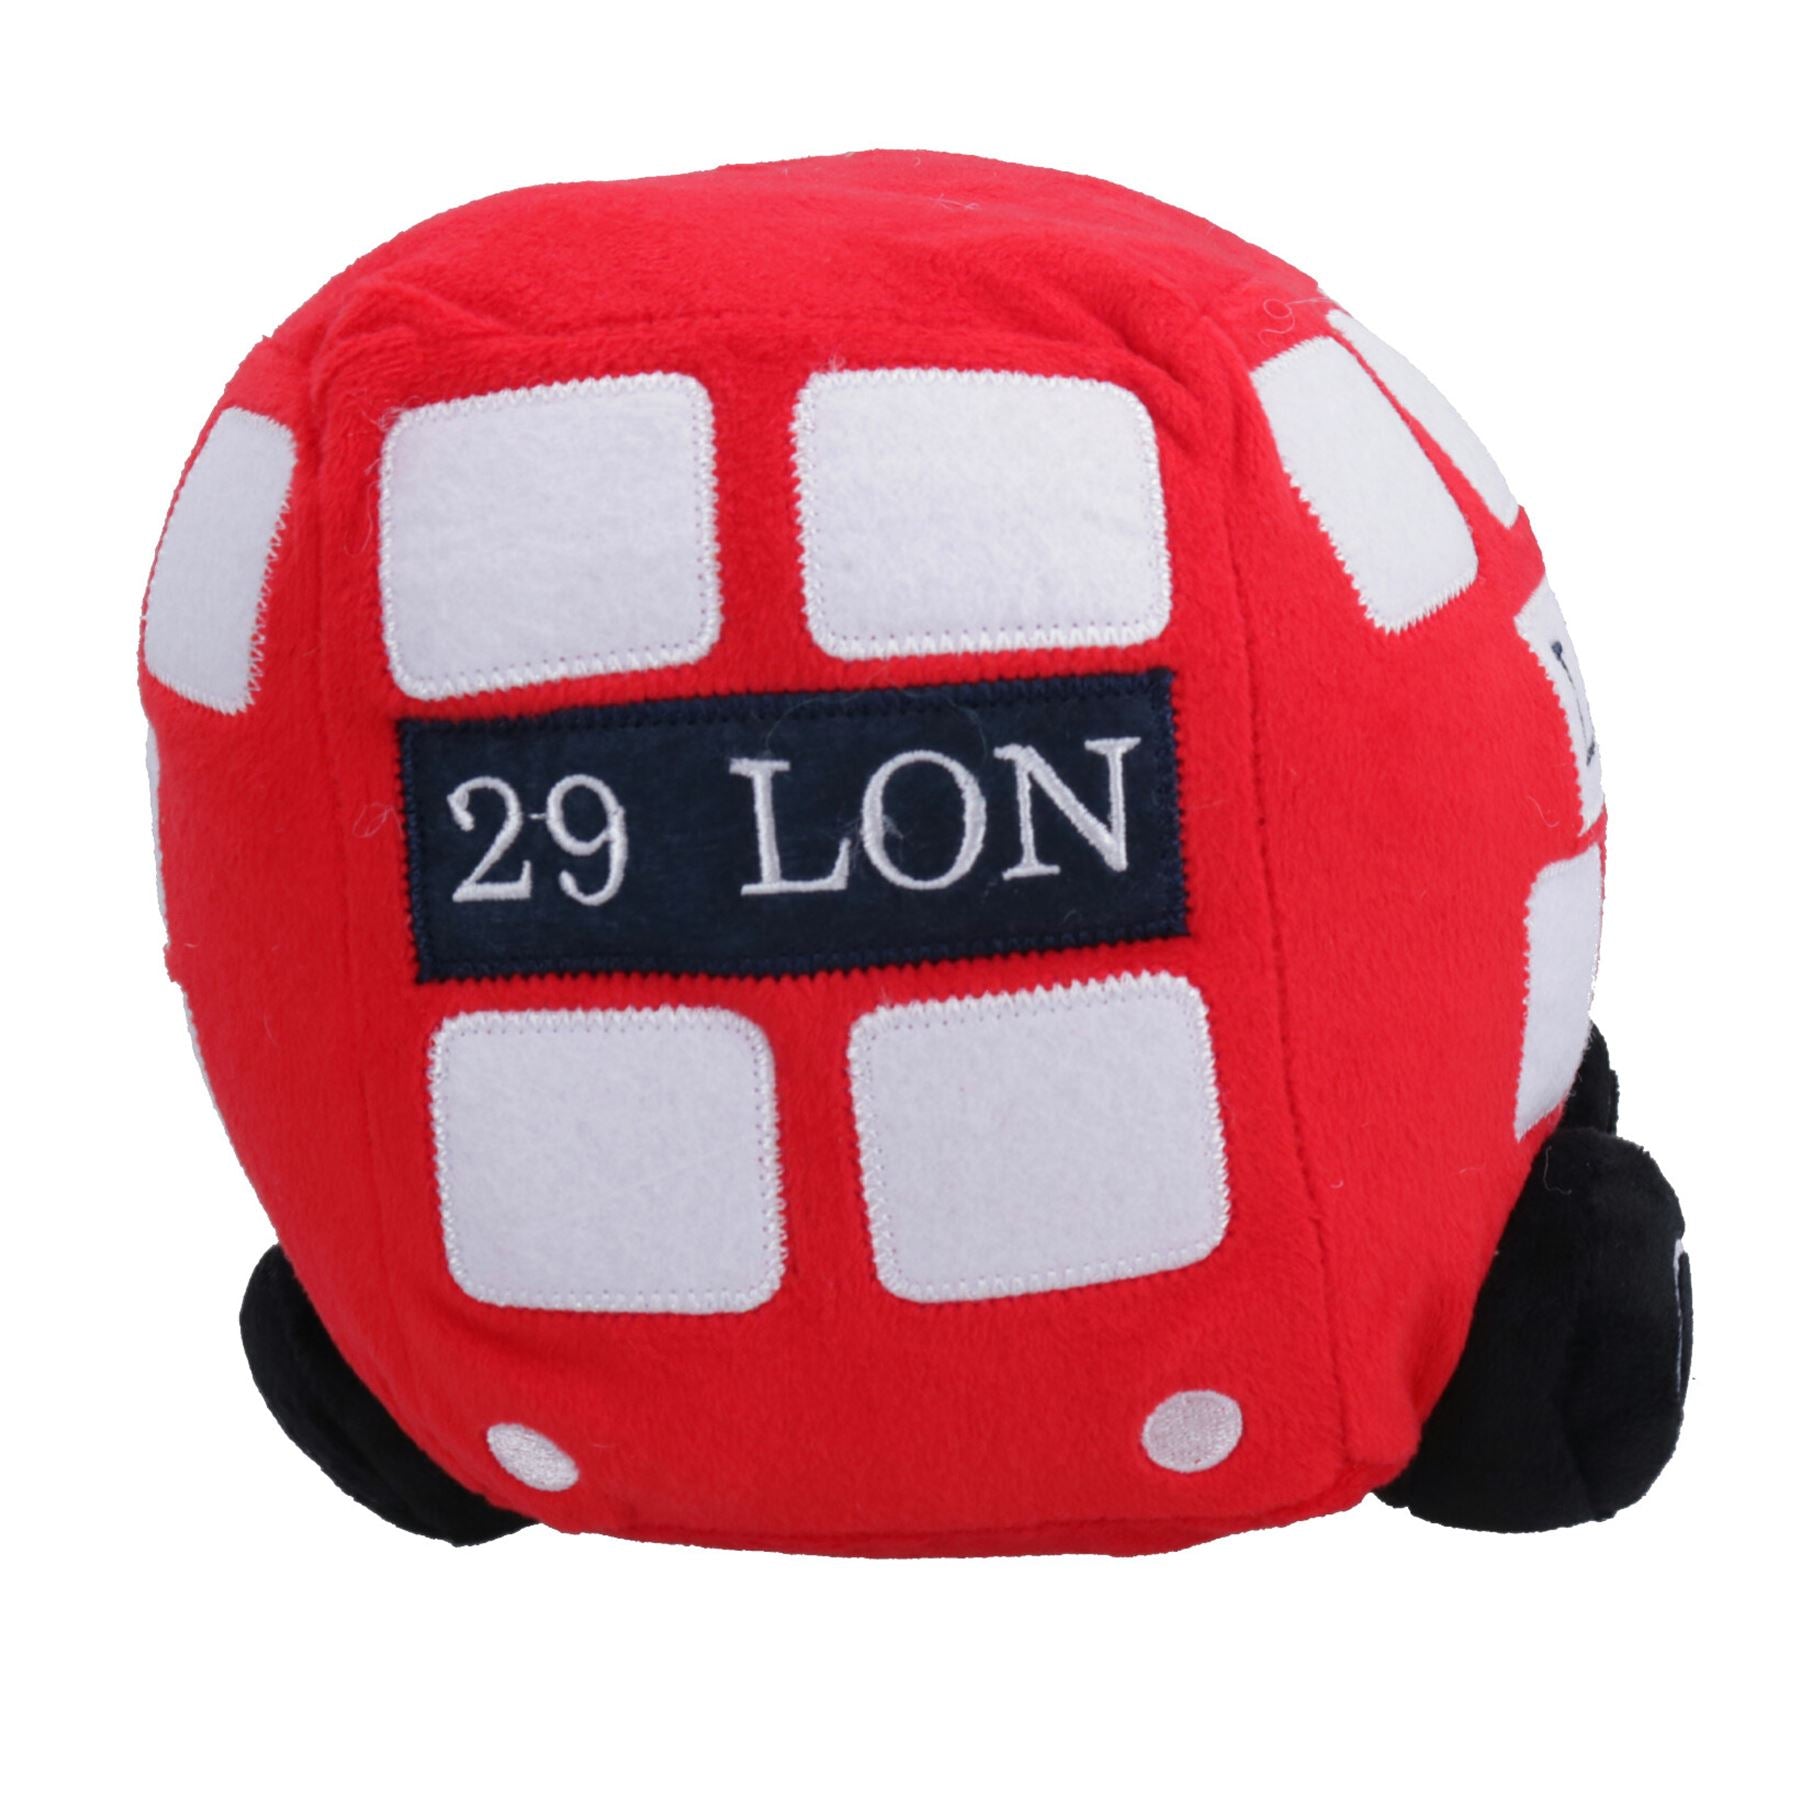 Plush London Bus Dog Toy Dog Puppy Play Toy With Squeak Gift 16x21cm